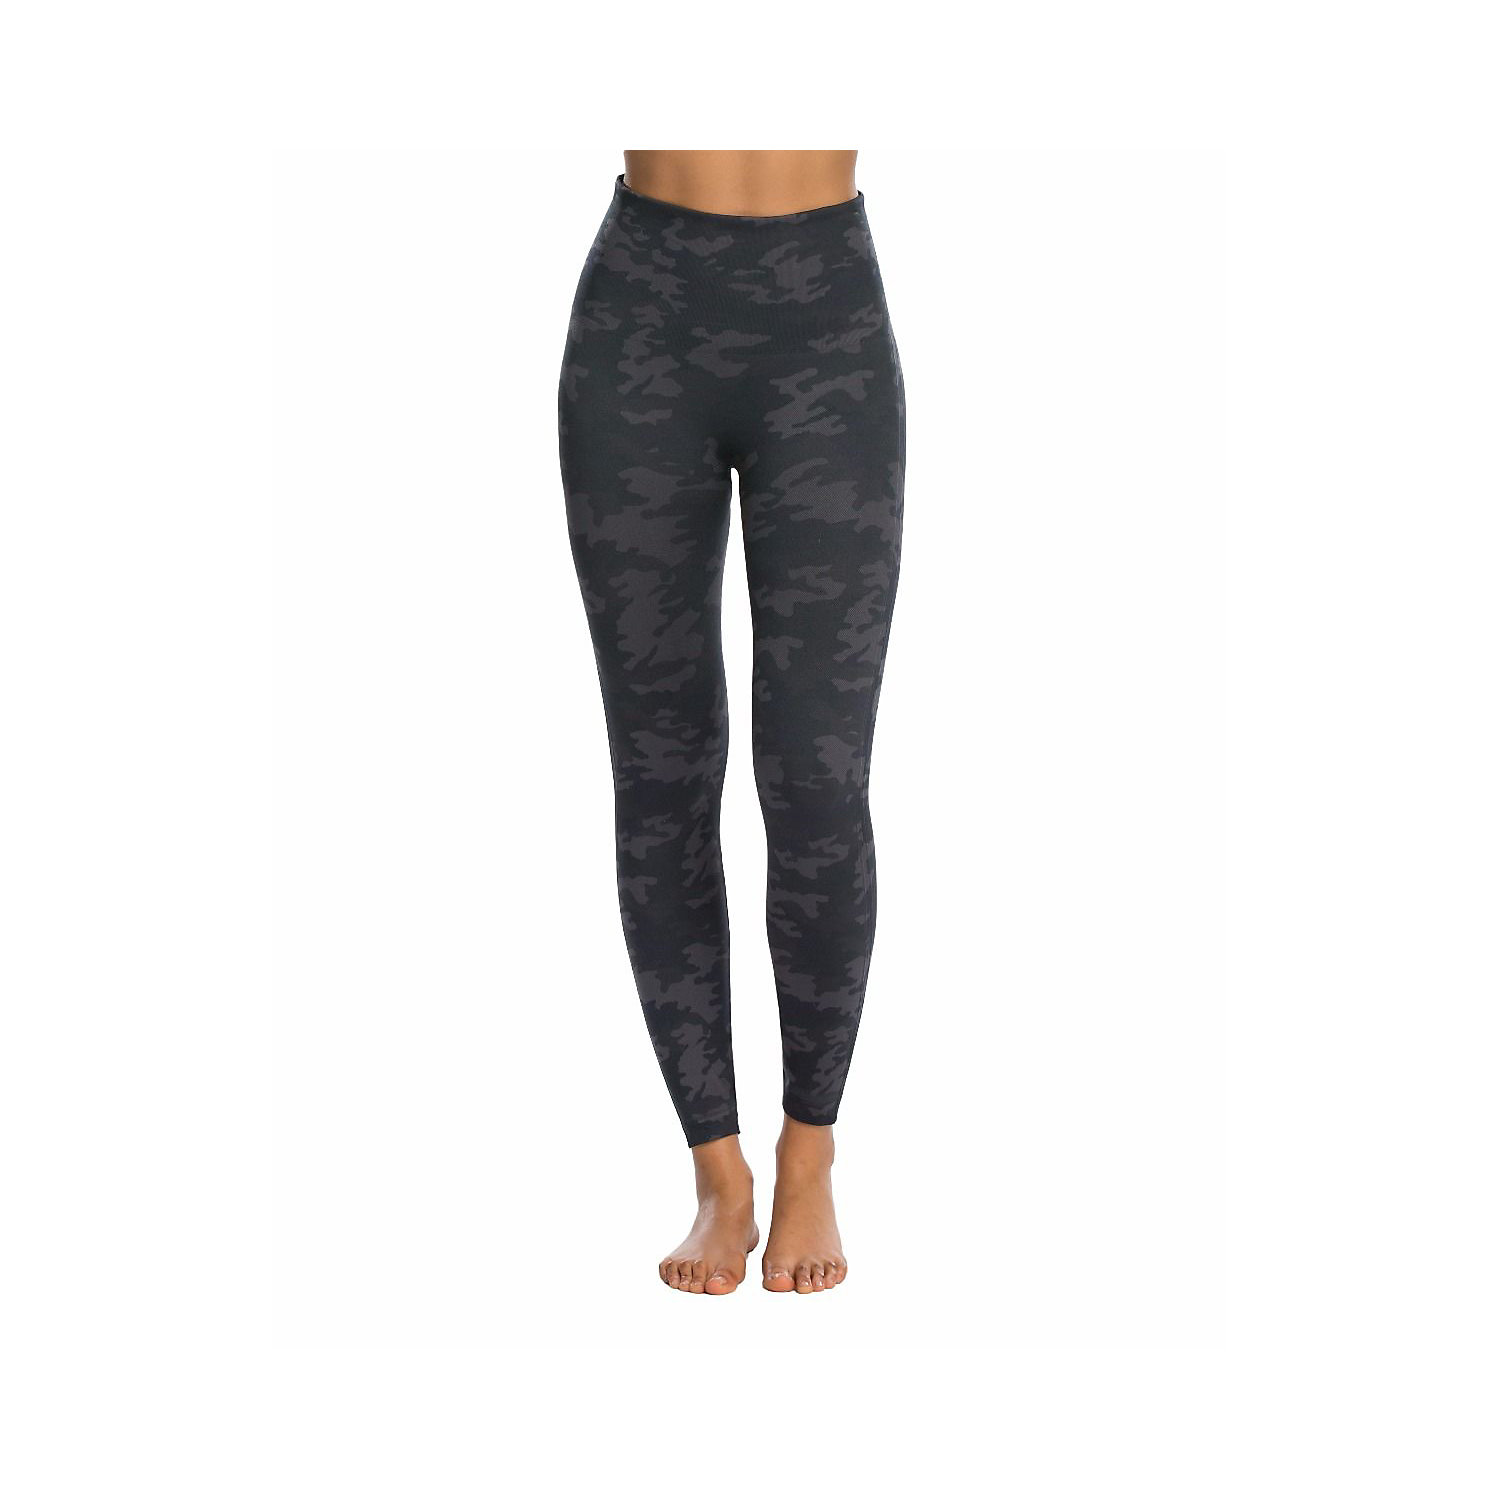 Spanx Womens Look At Me Now Seamless Legging